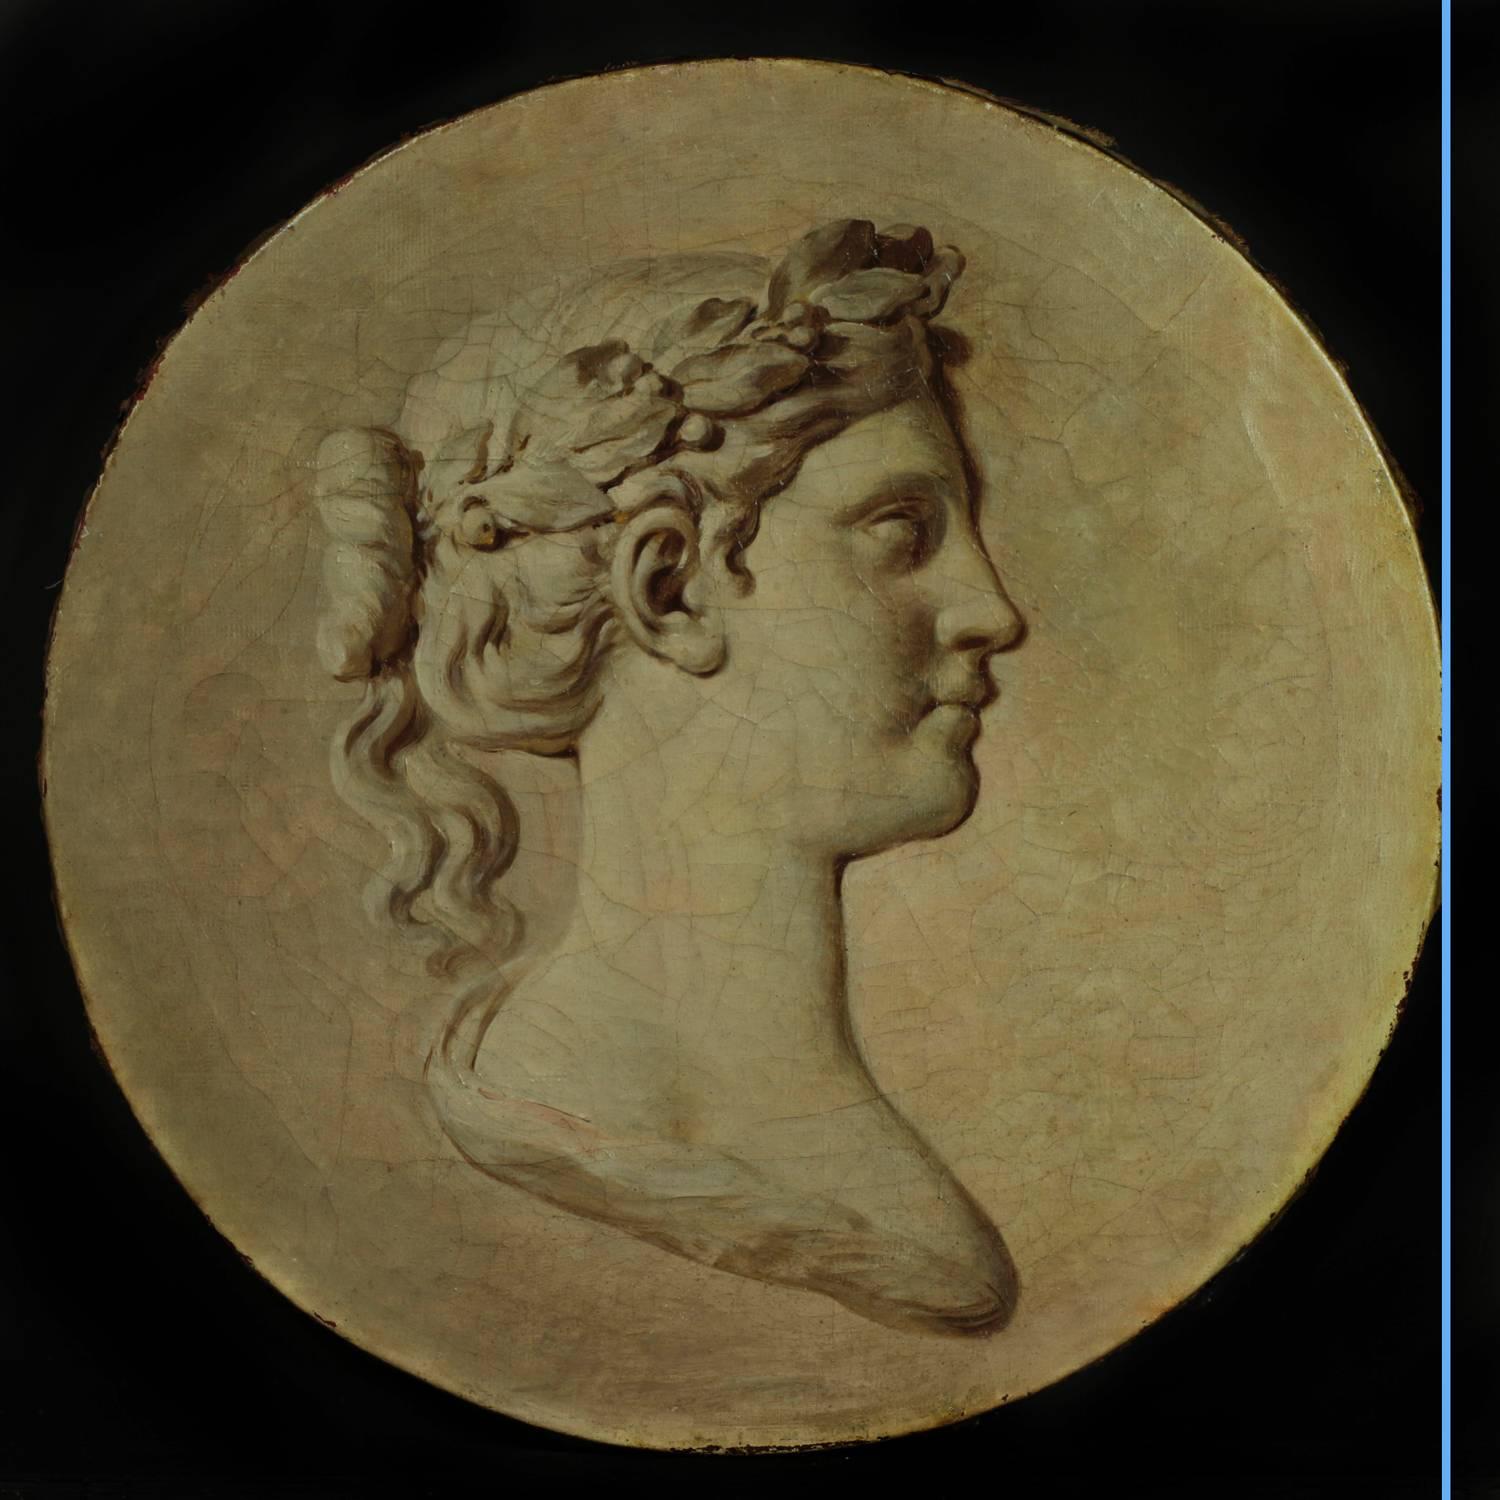 Attributed to Piat Joseph Sauvage (1744-1818).
Trompe-l'œil in grisaille depicting Athena.
Oil on canvas (19th century frame),
late 18th-early 19th century.
Measures: D 61 cm with frame.
D 54 cm without frame.

Biography:
Piat Joseph